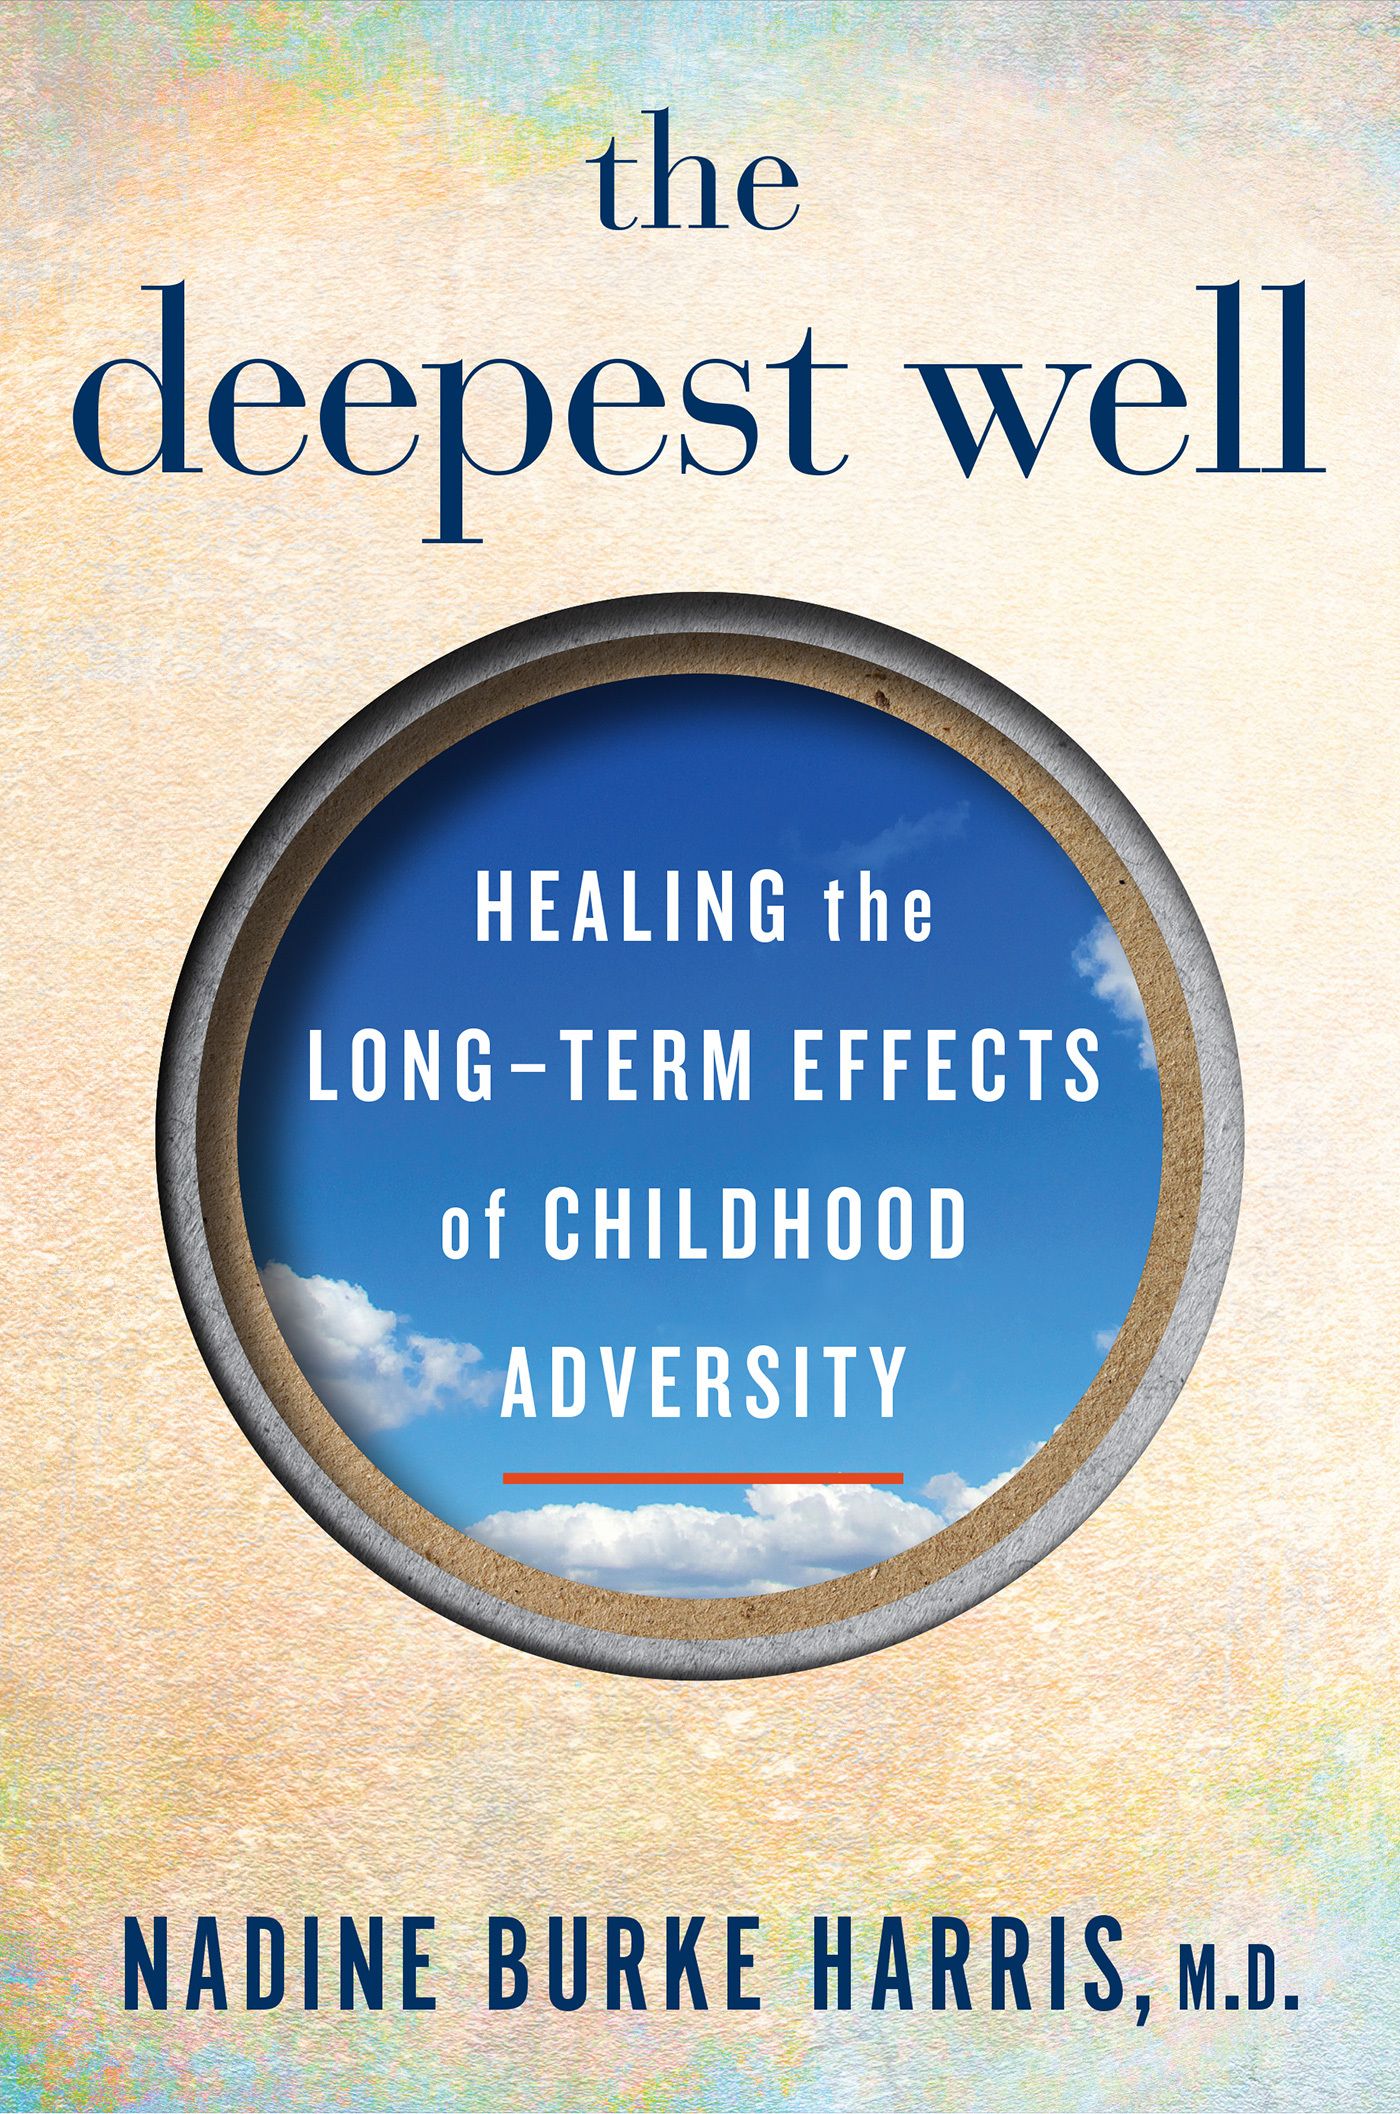 Download The Deepest Well: Healing the Long-Term Effects of Childhood Adversity PDF by Nadine Burke Harris